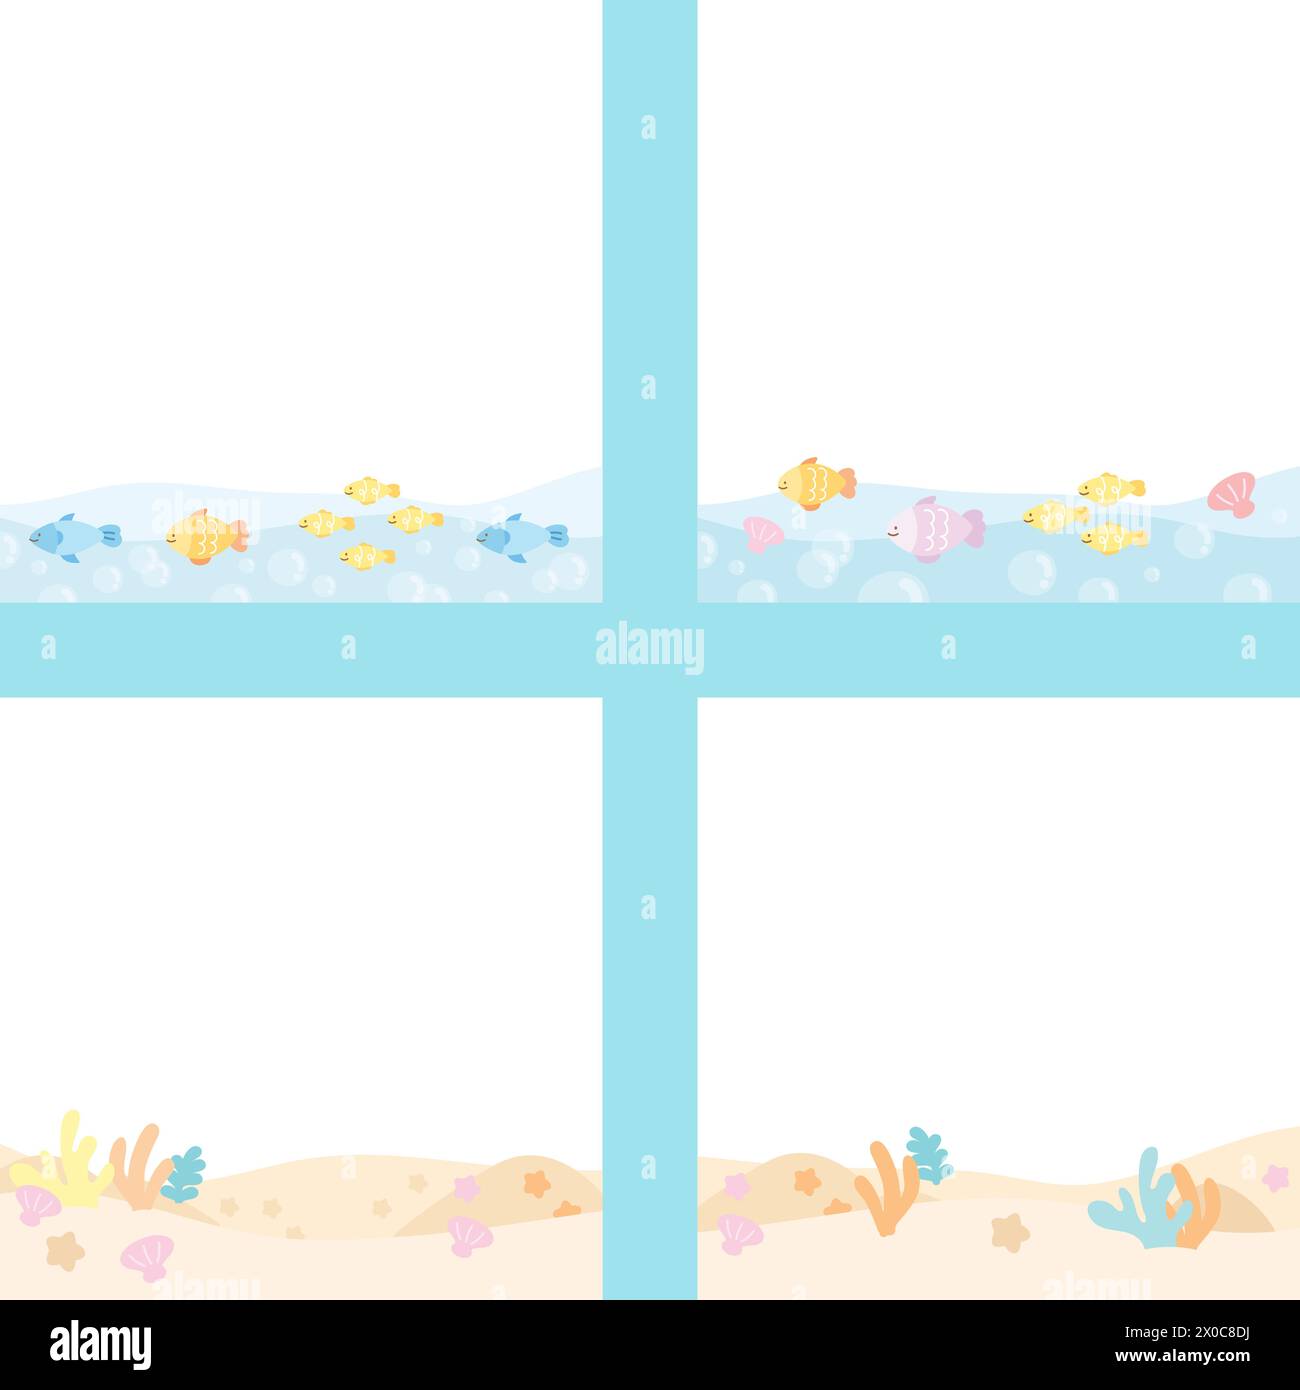 Under the sea frame set with fish, pearl shell, coral reef for aquarium, animal, banner, background, wallpaper, ad template, diving activity, marine Stock Vector